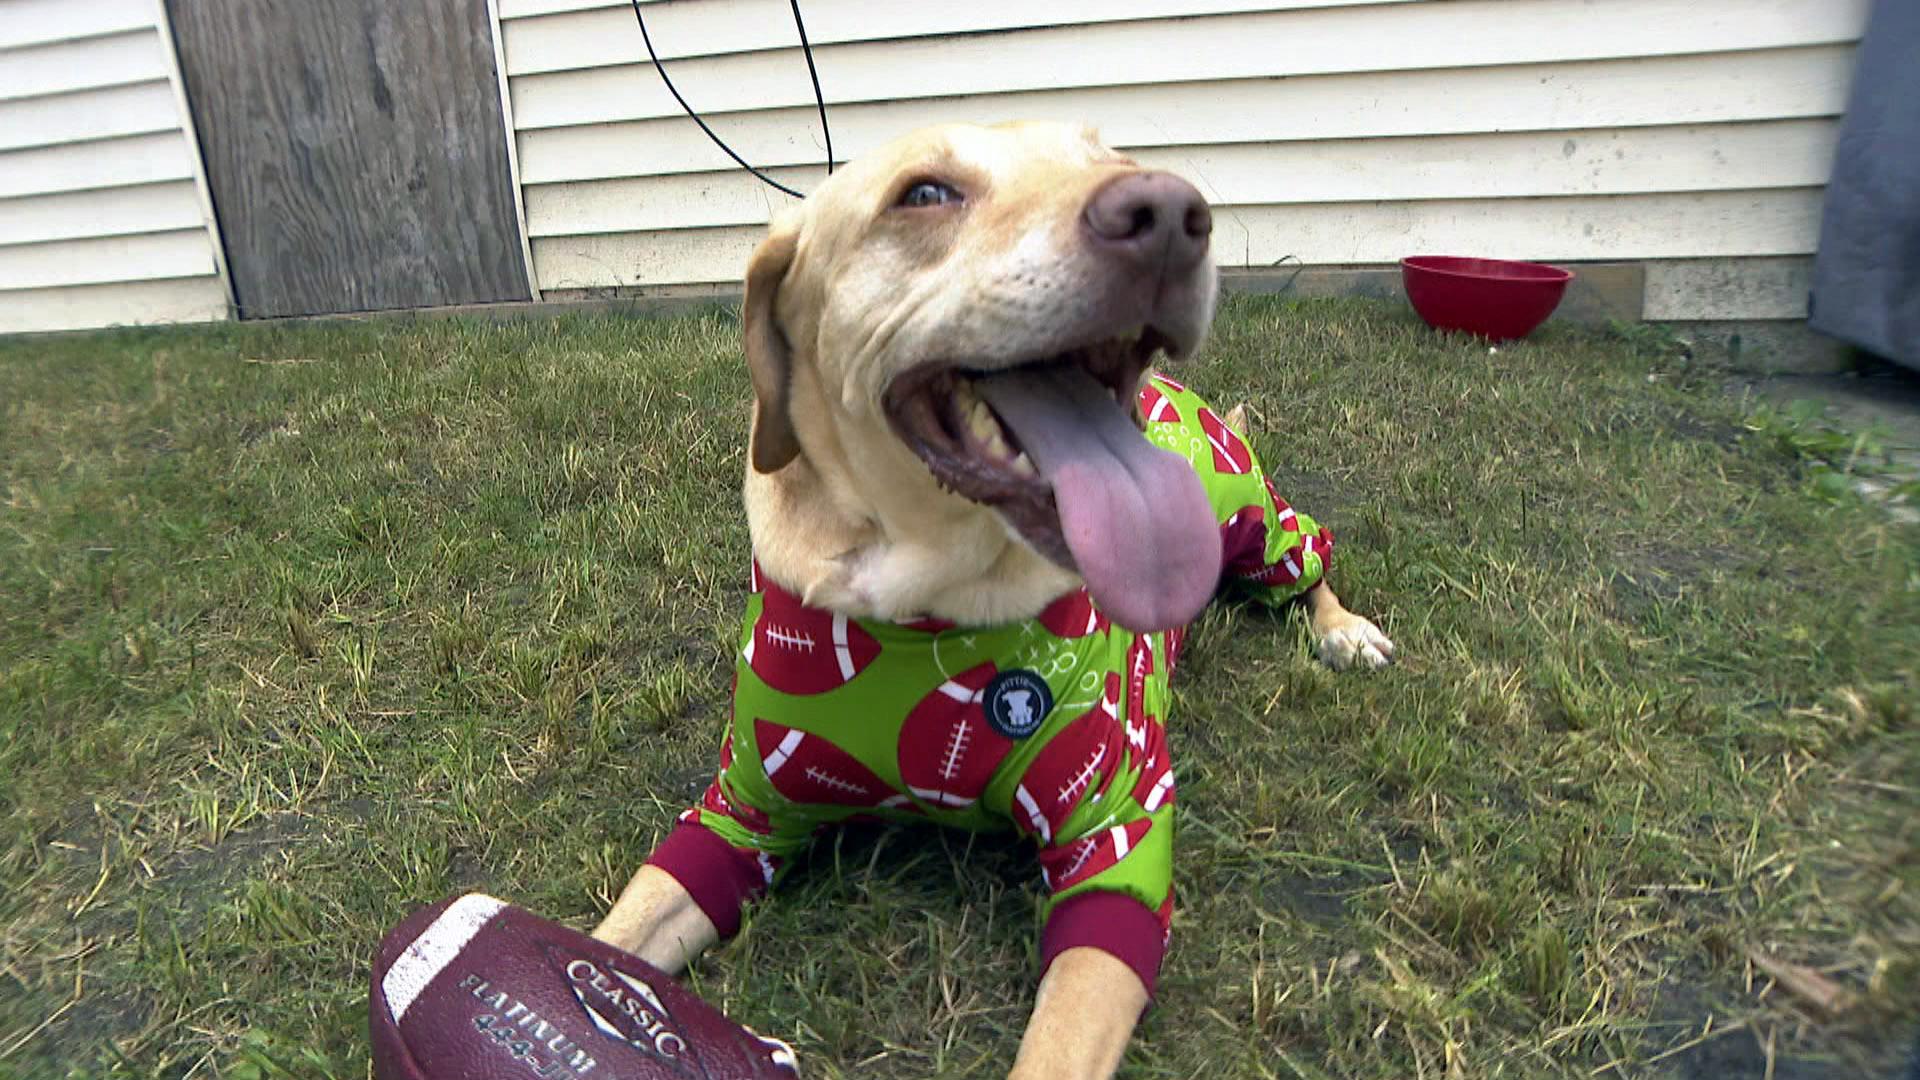 A dog models apparel from Pittie Clothing Company, founded by Erin Crowley of Humboldt Park. (WTTW News)